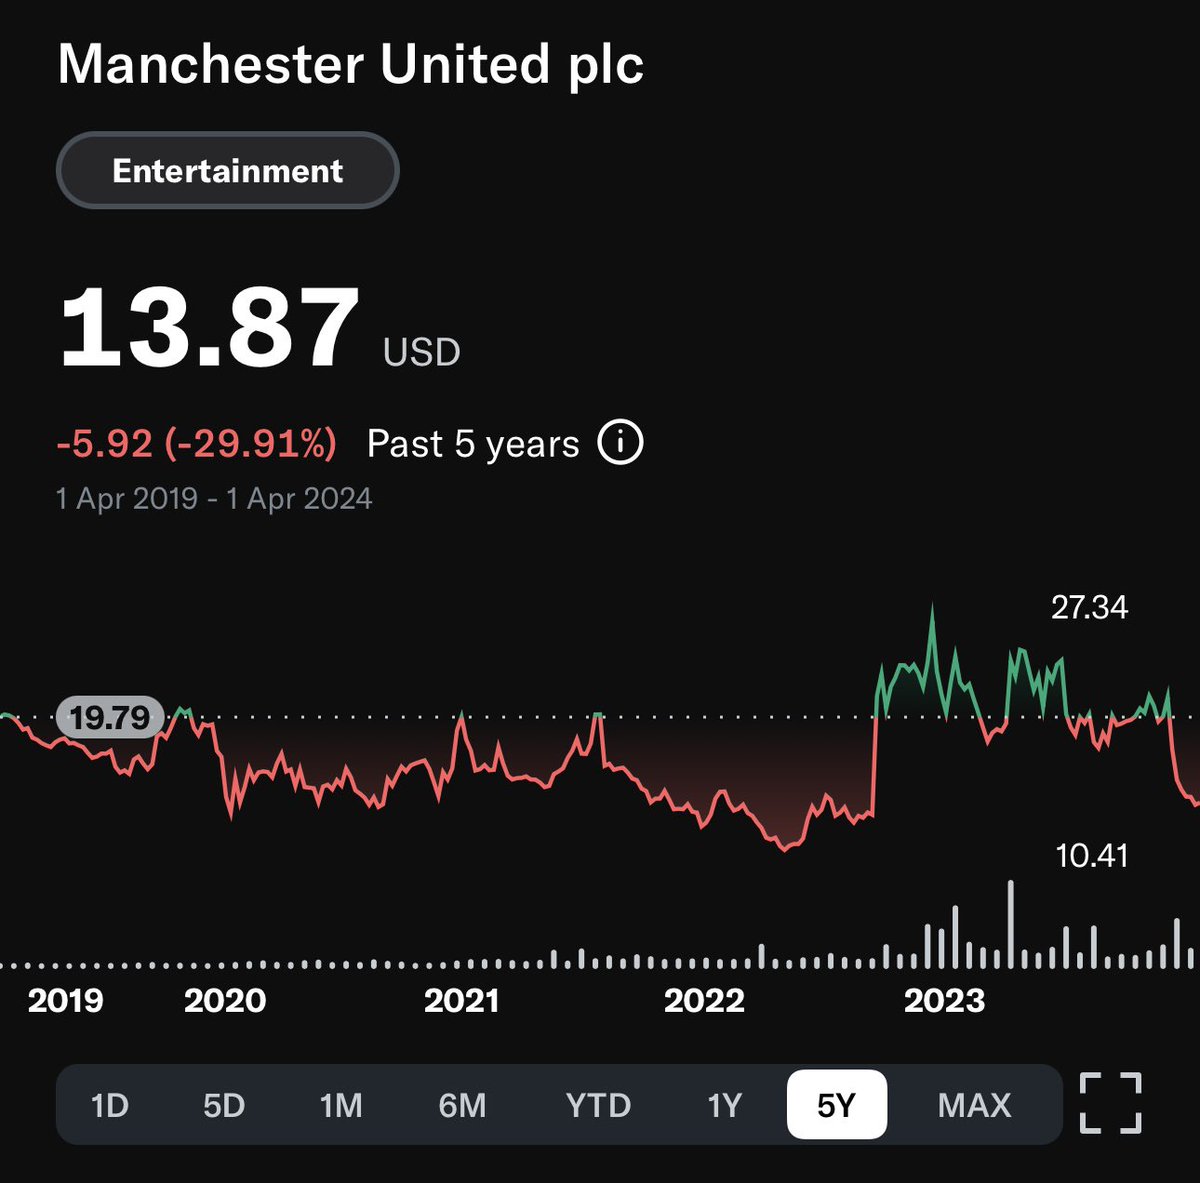 Manchester United share price ⬇️ almost a third this year and less than half the peak price of just over a year ago. Market value of shares gives a total equity value of £1.87bn.